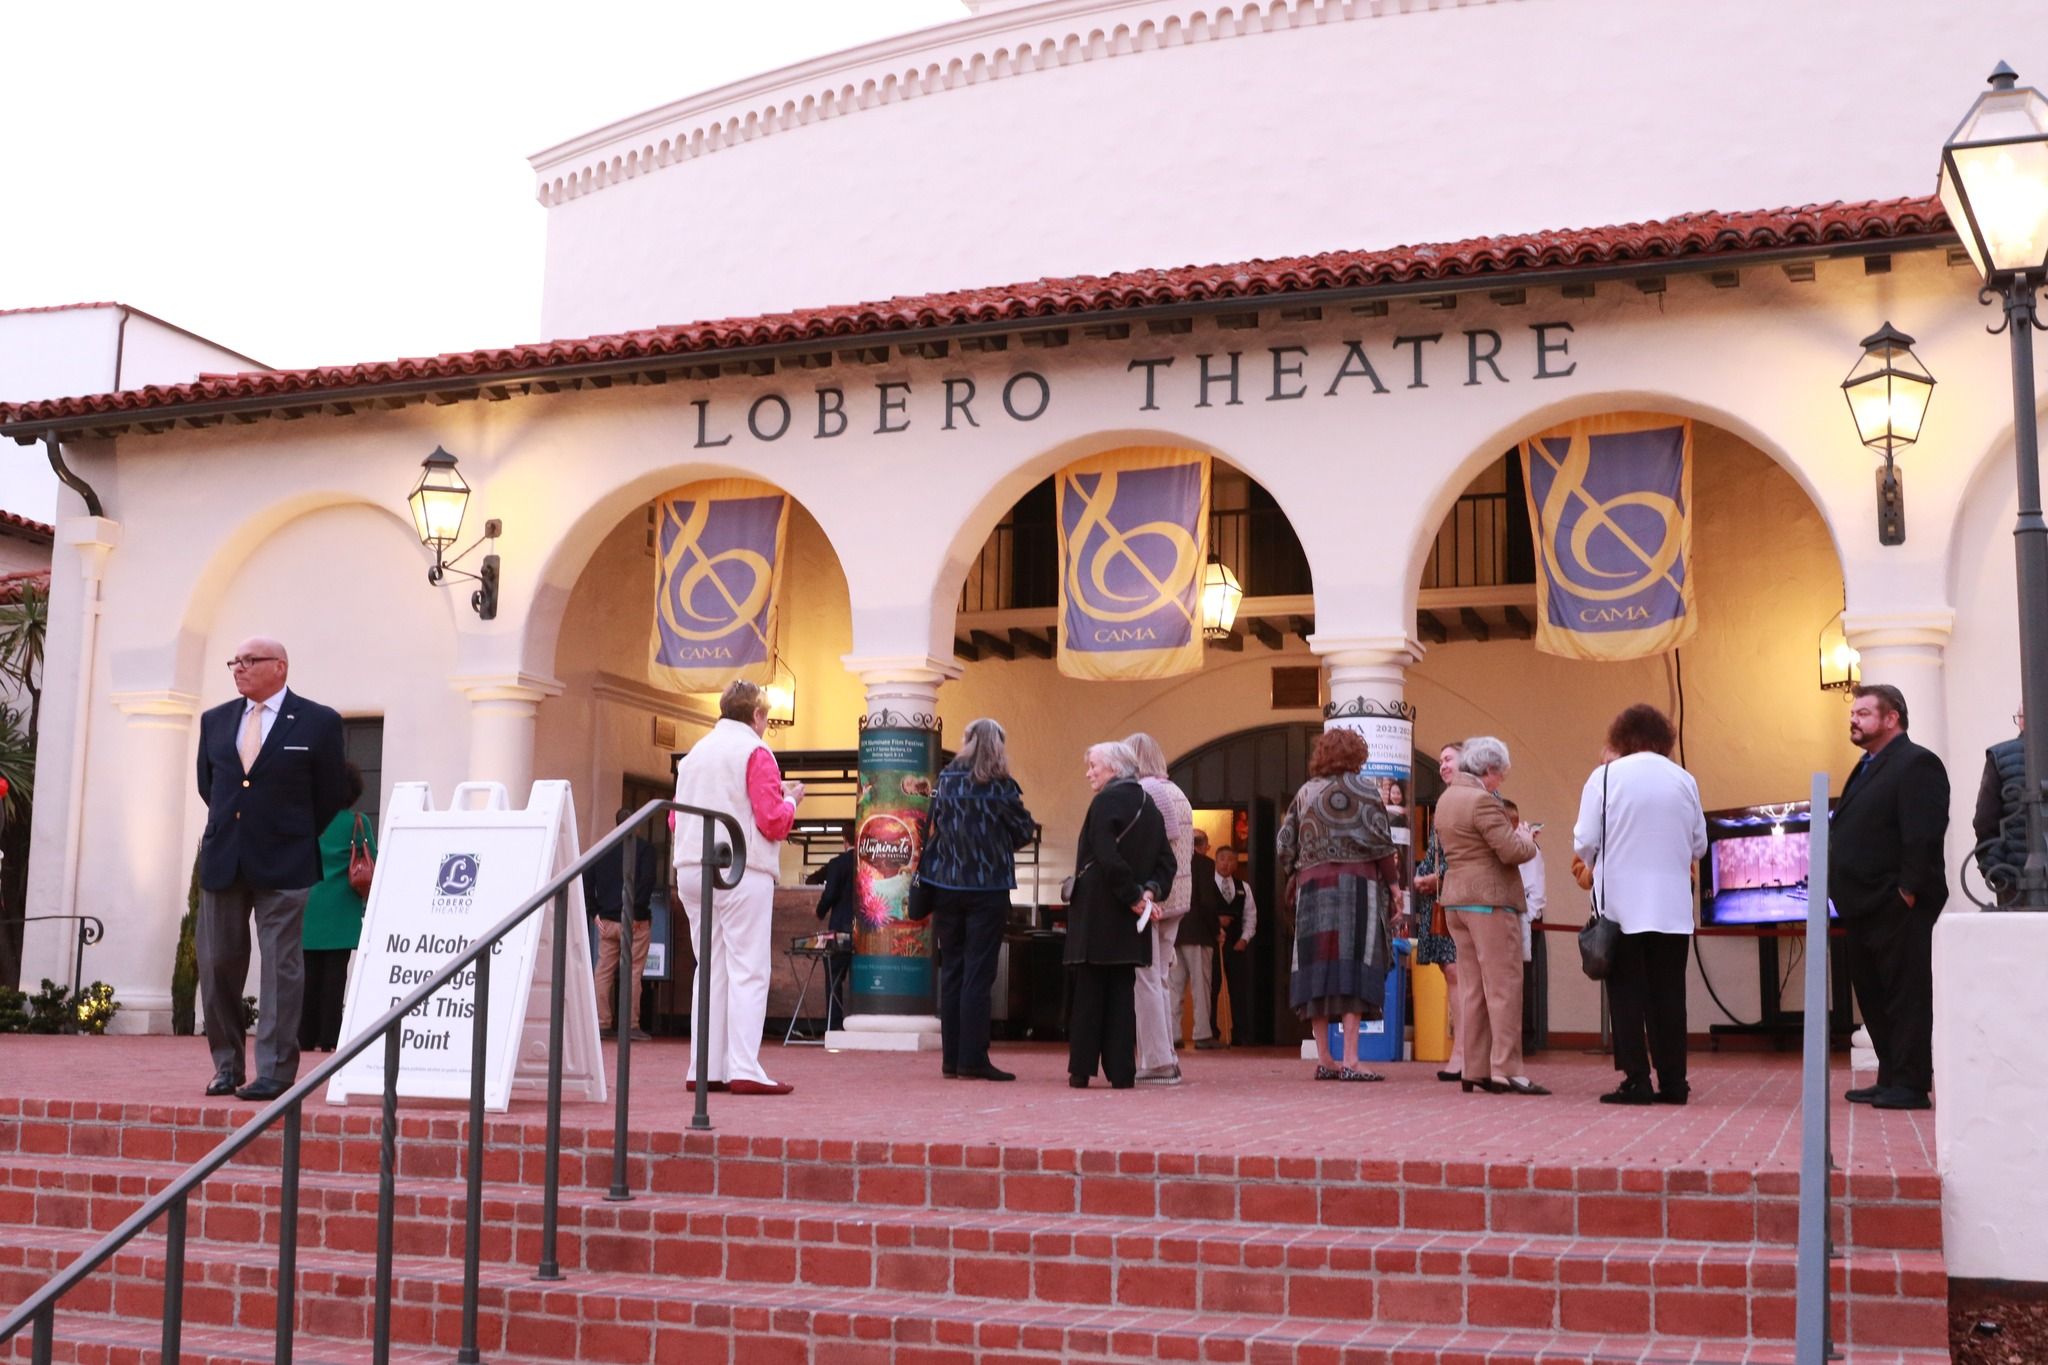 People dressed up for a night out in front of the Lobero Theater in Santa Barbara